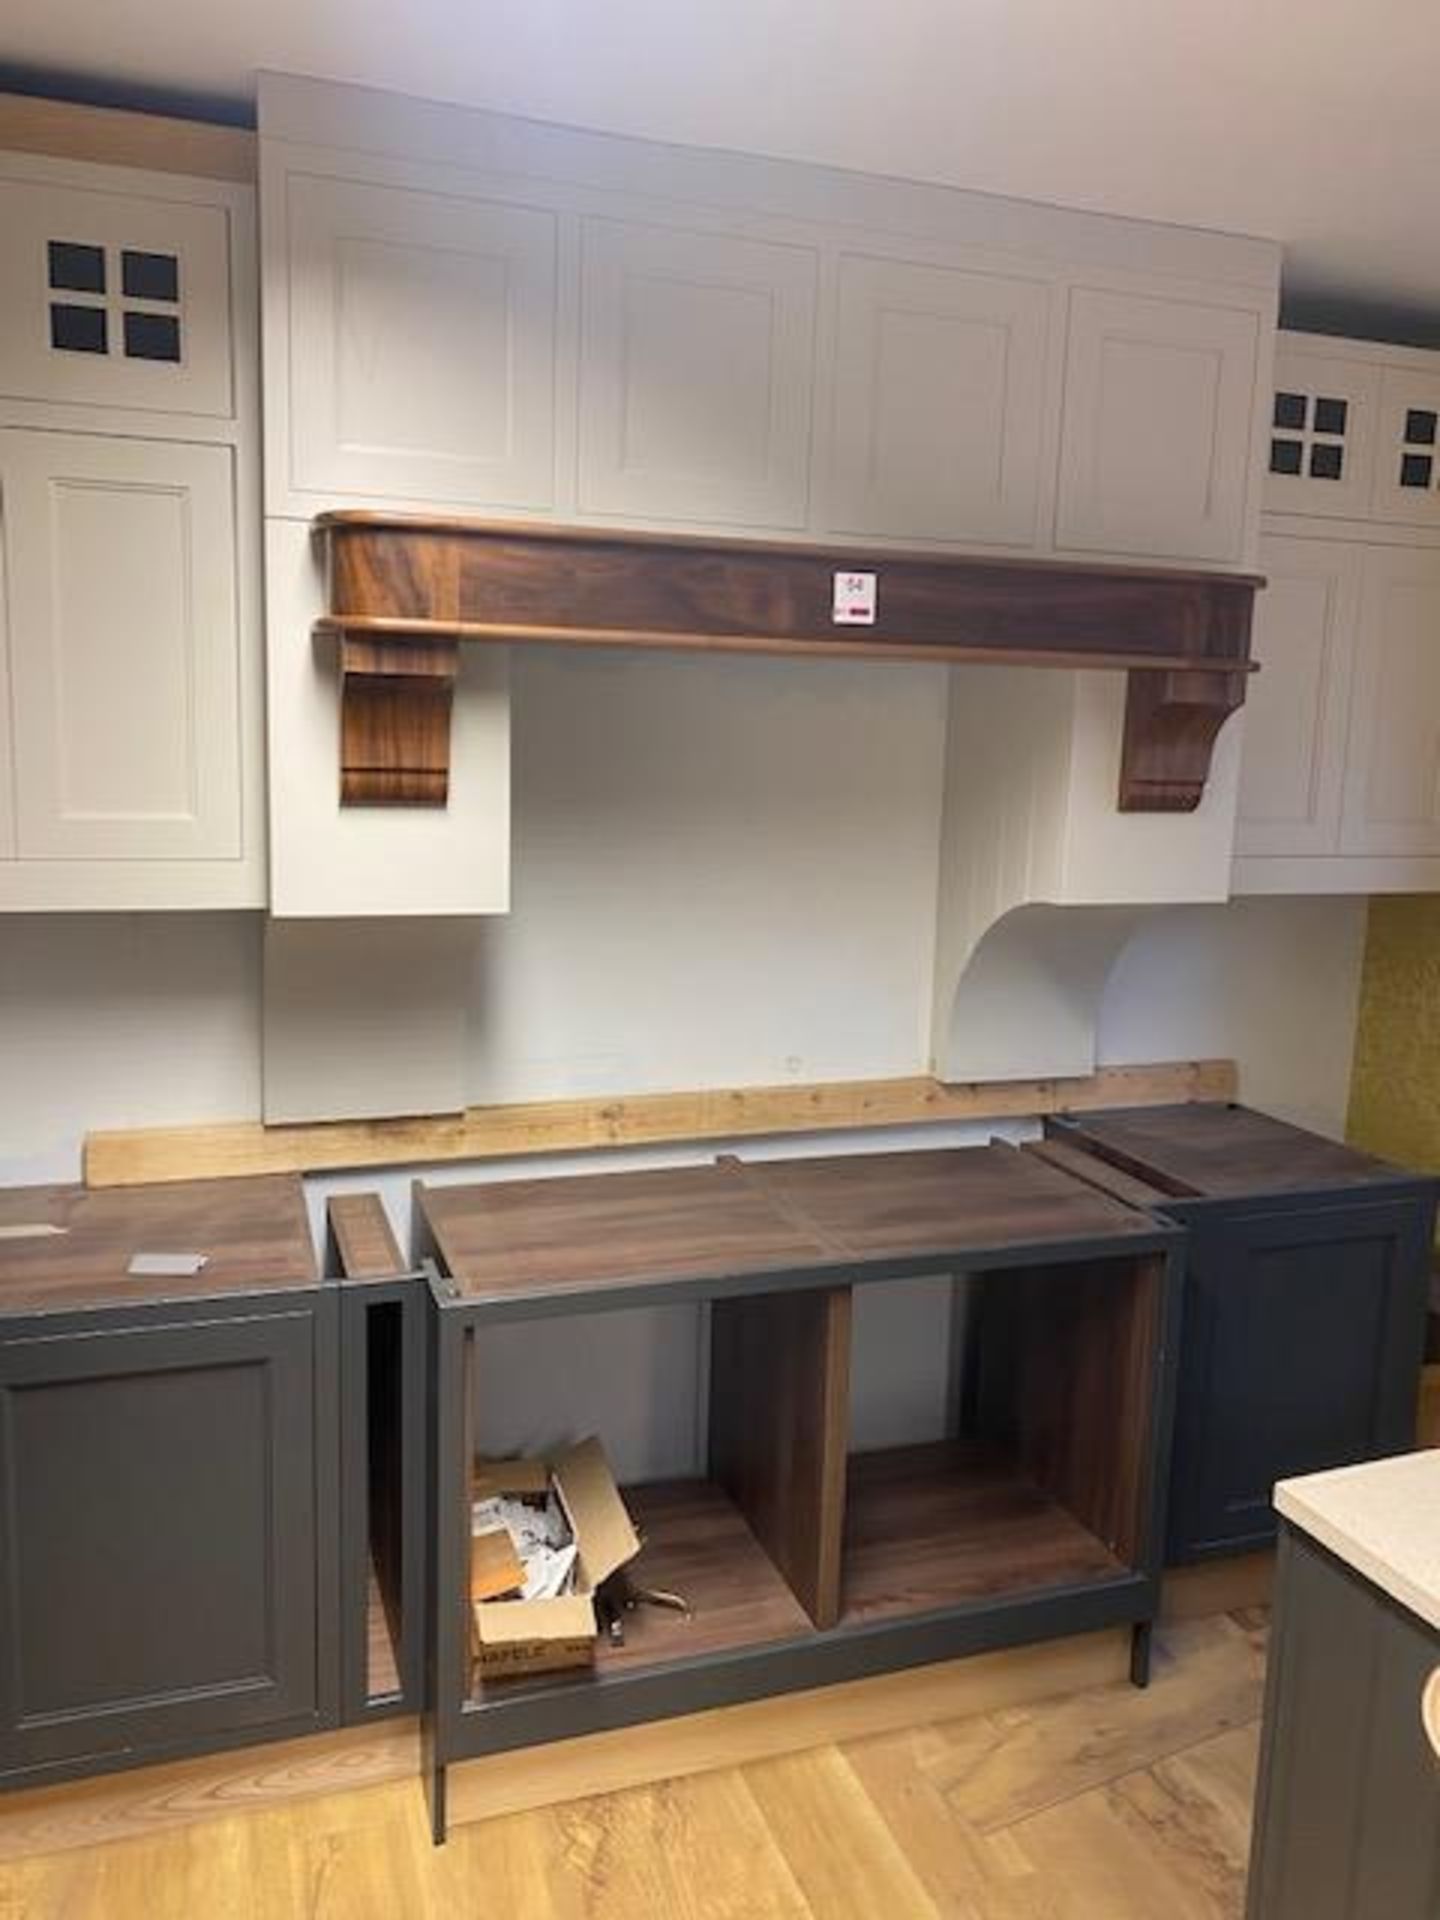 Part built display kitchen (as lotted, please note that appliances are not included) - Image 6 of 9